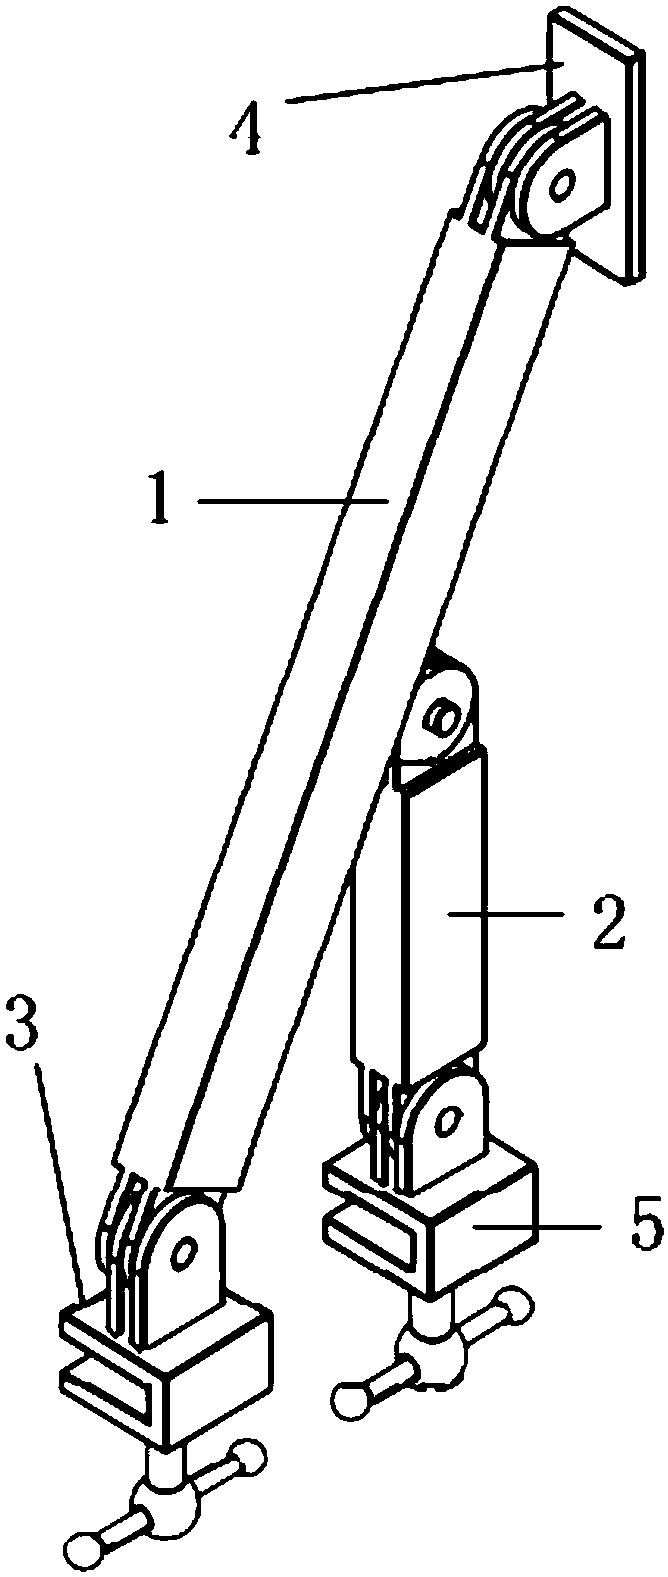 Supporting device